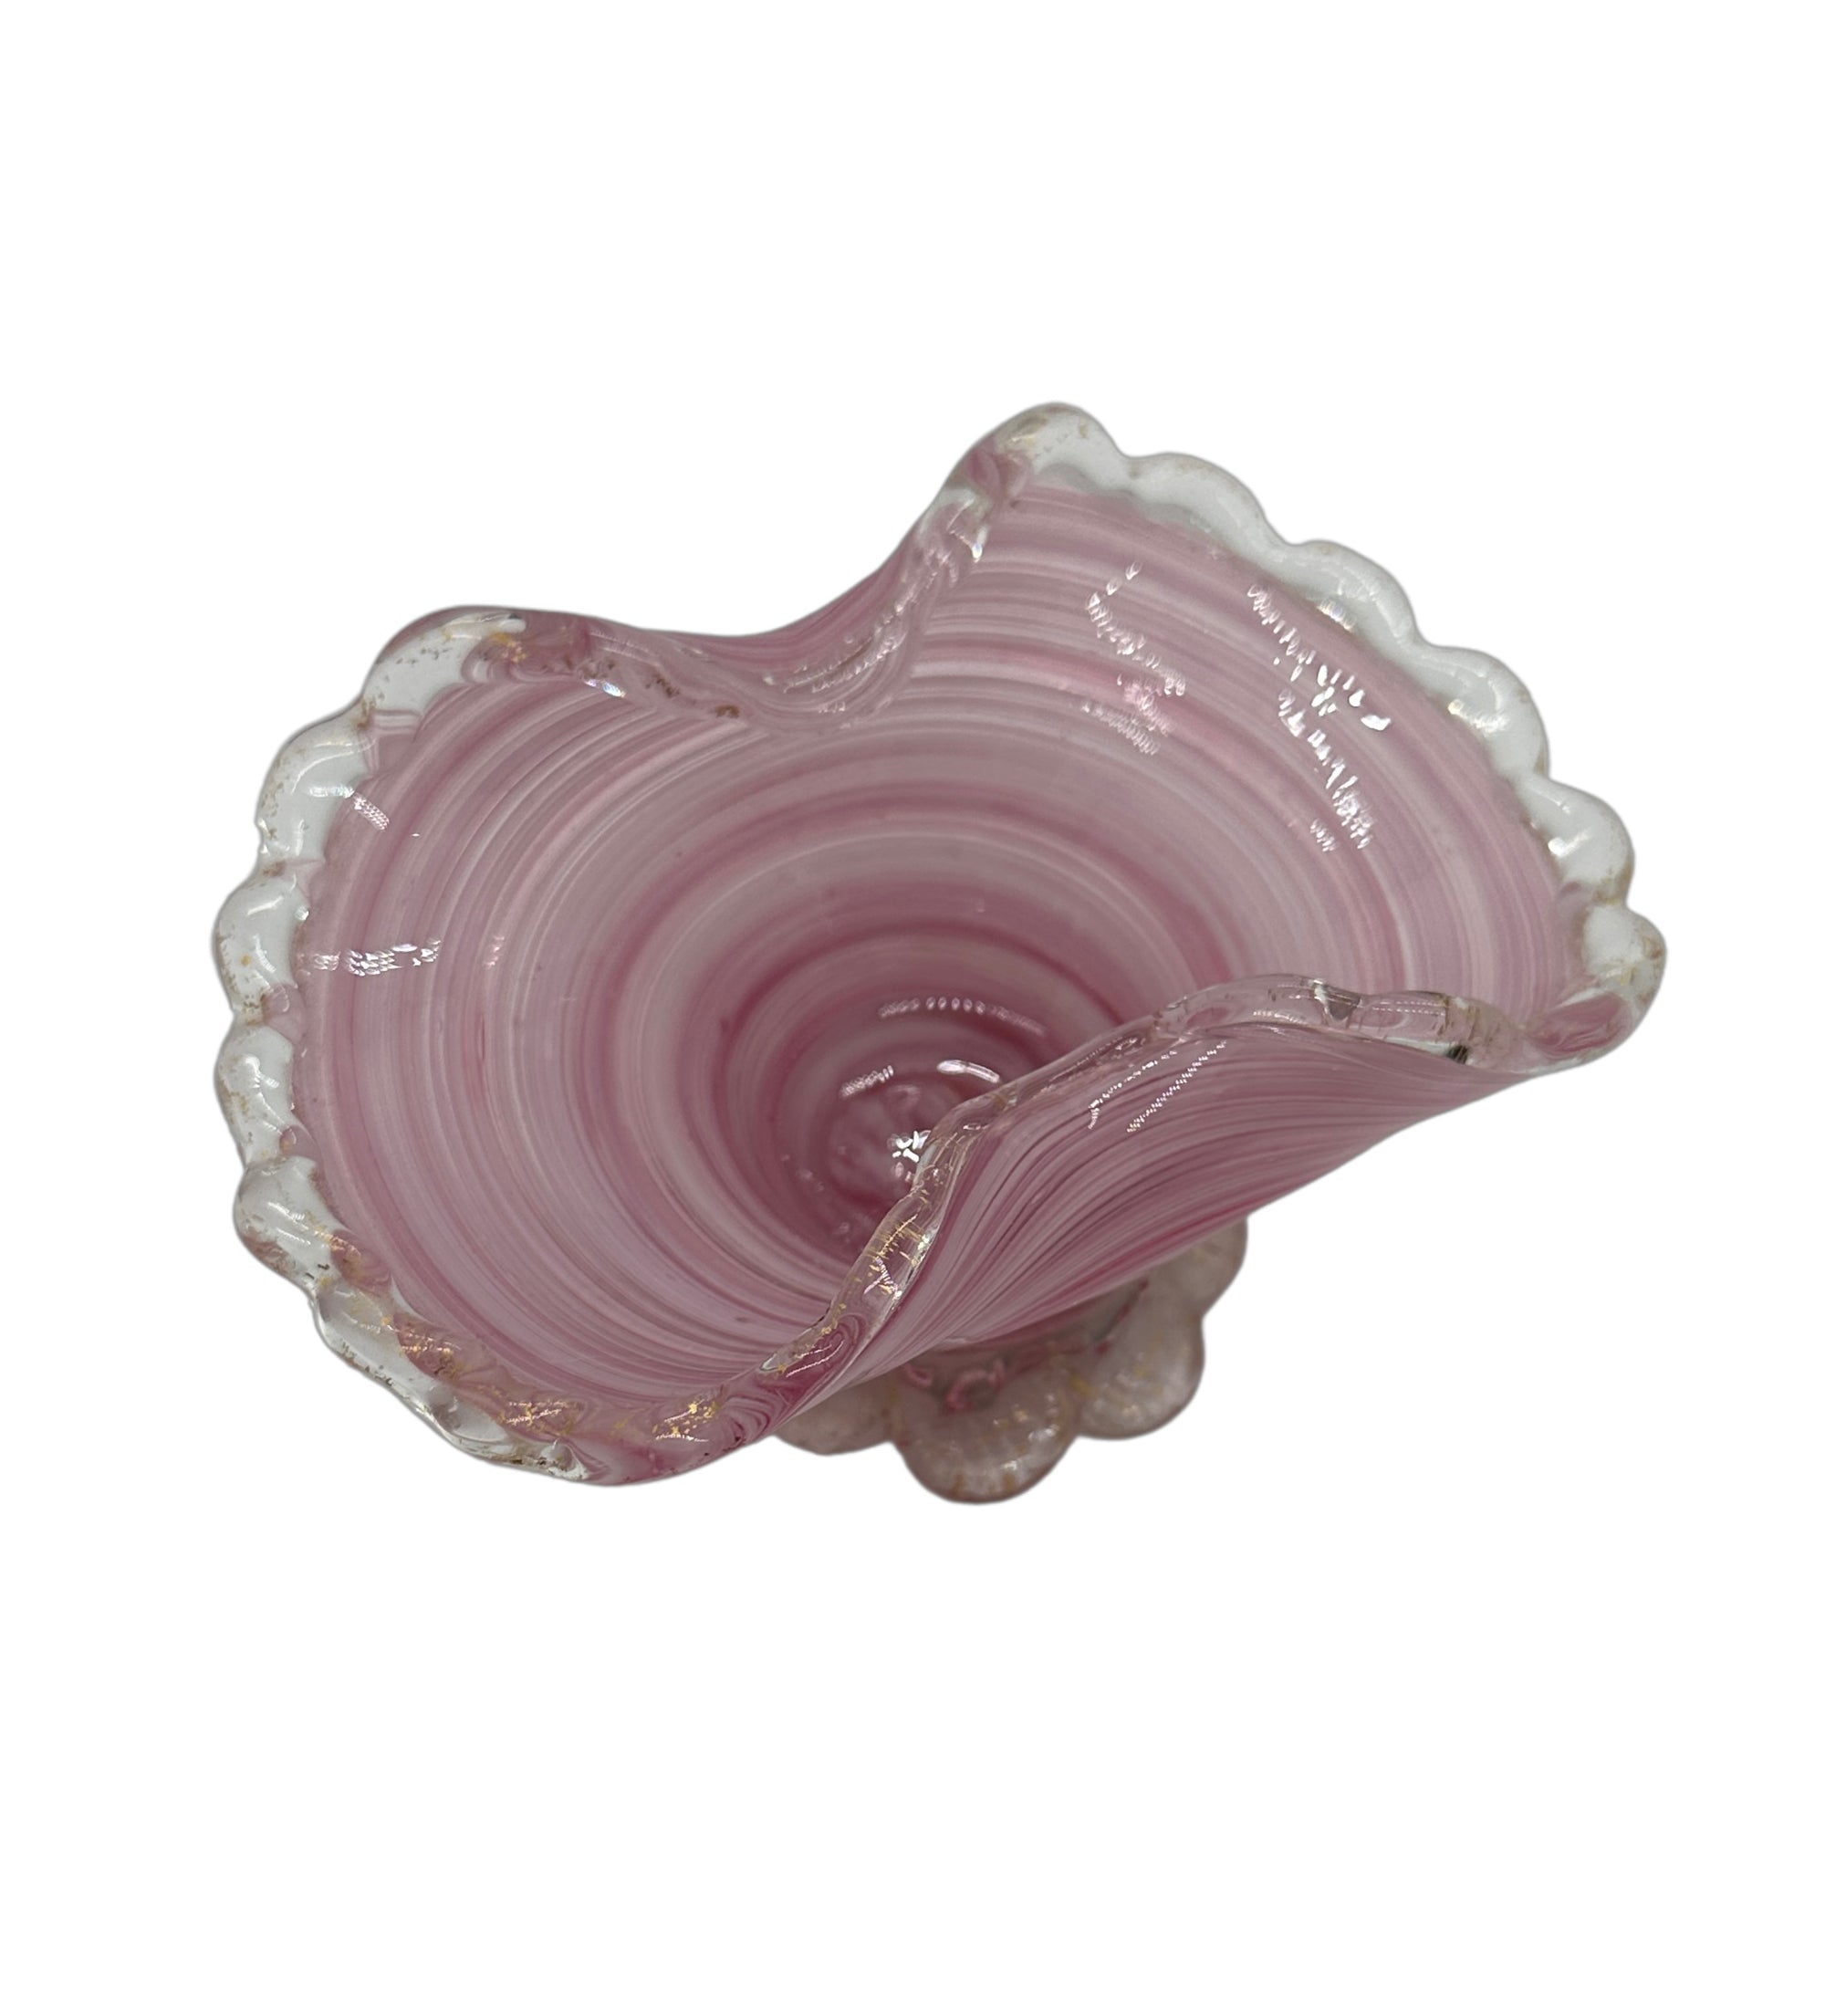 Vintage Muarno Small Pink Bowl with Ruffle